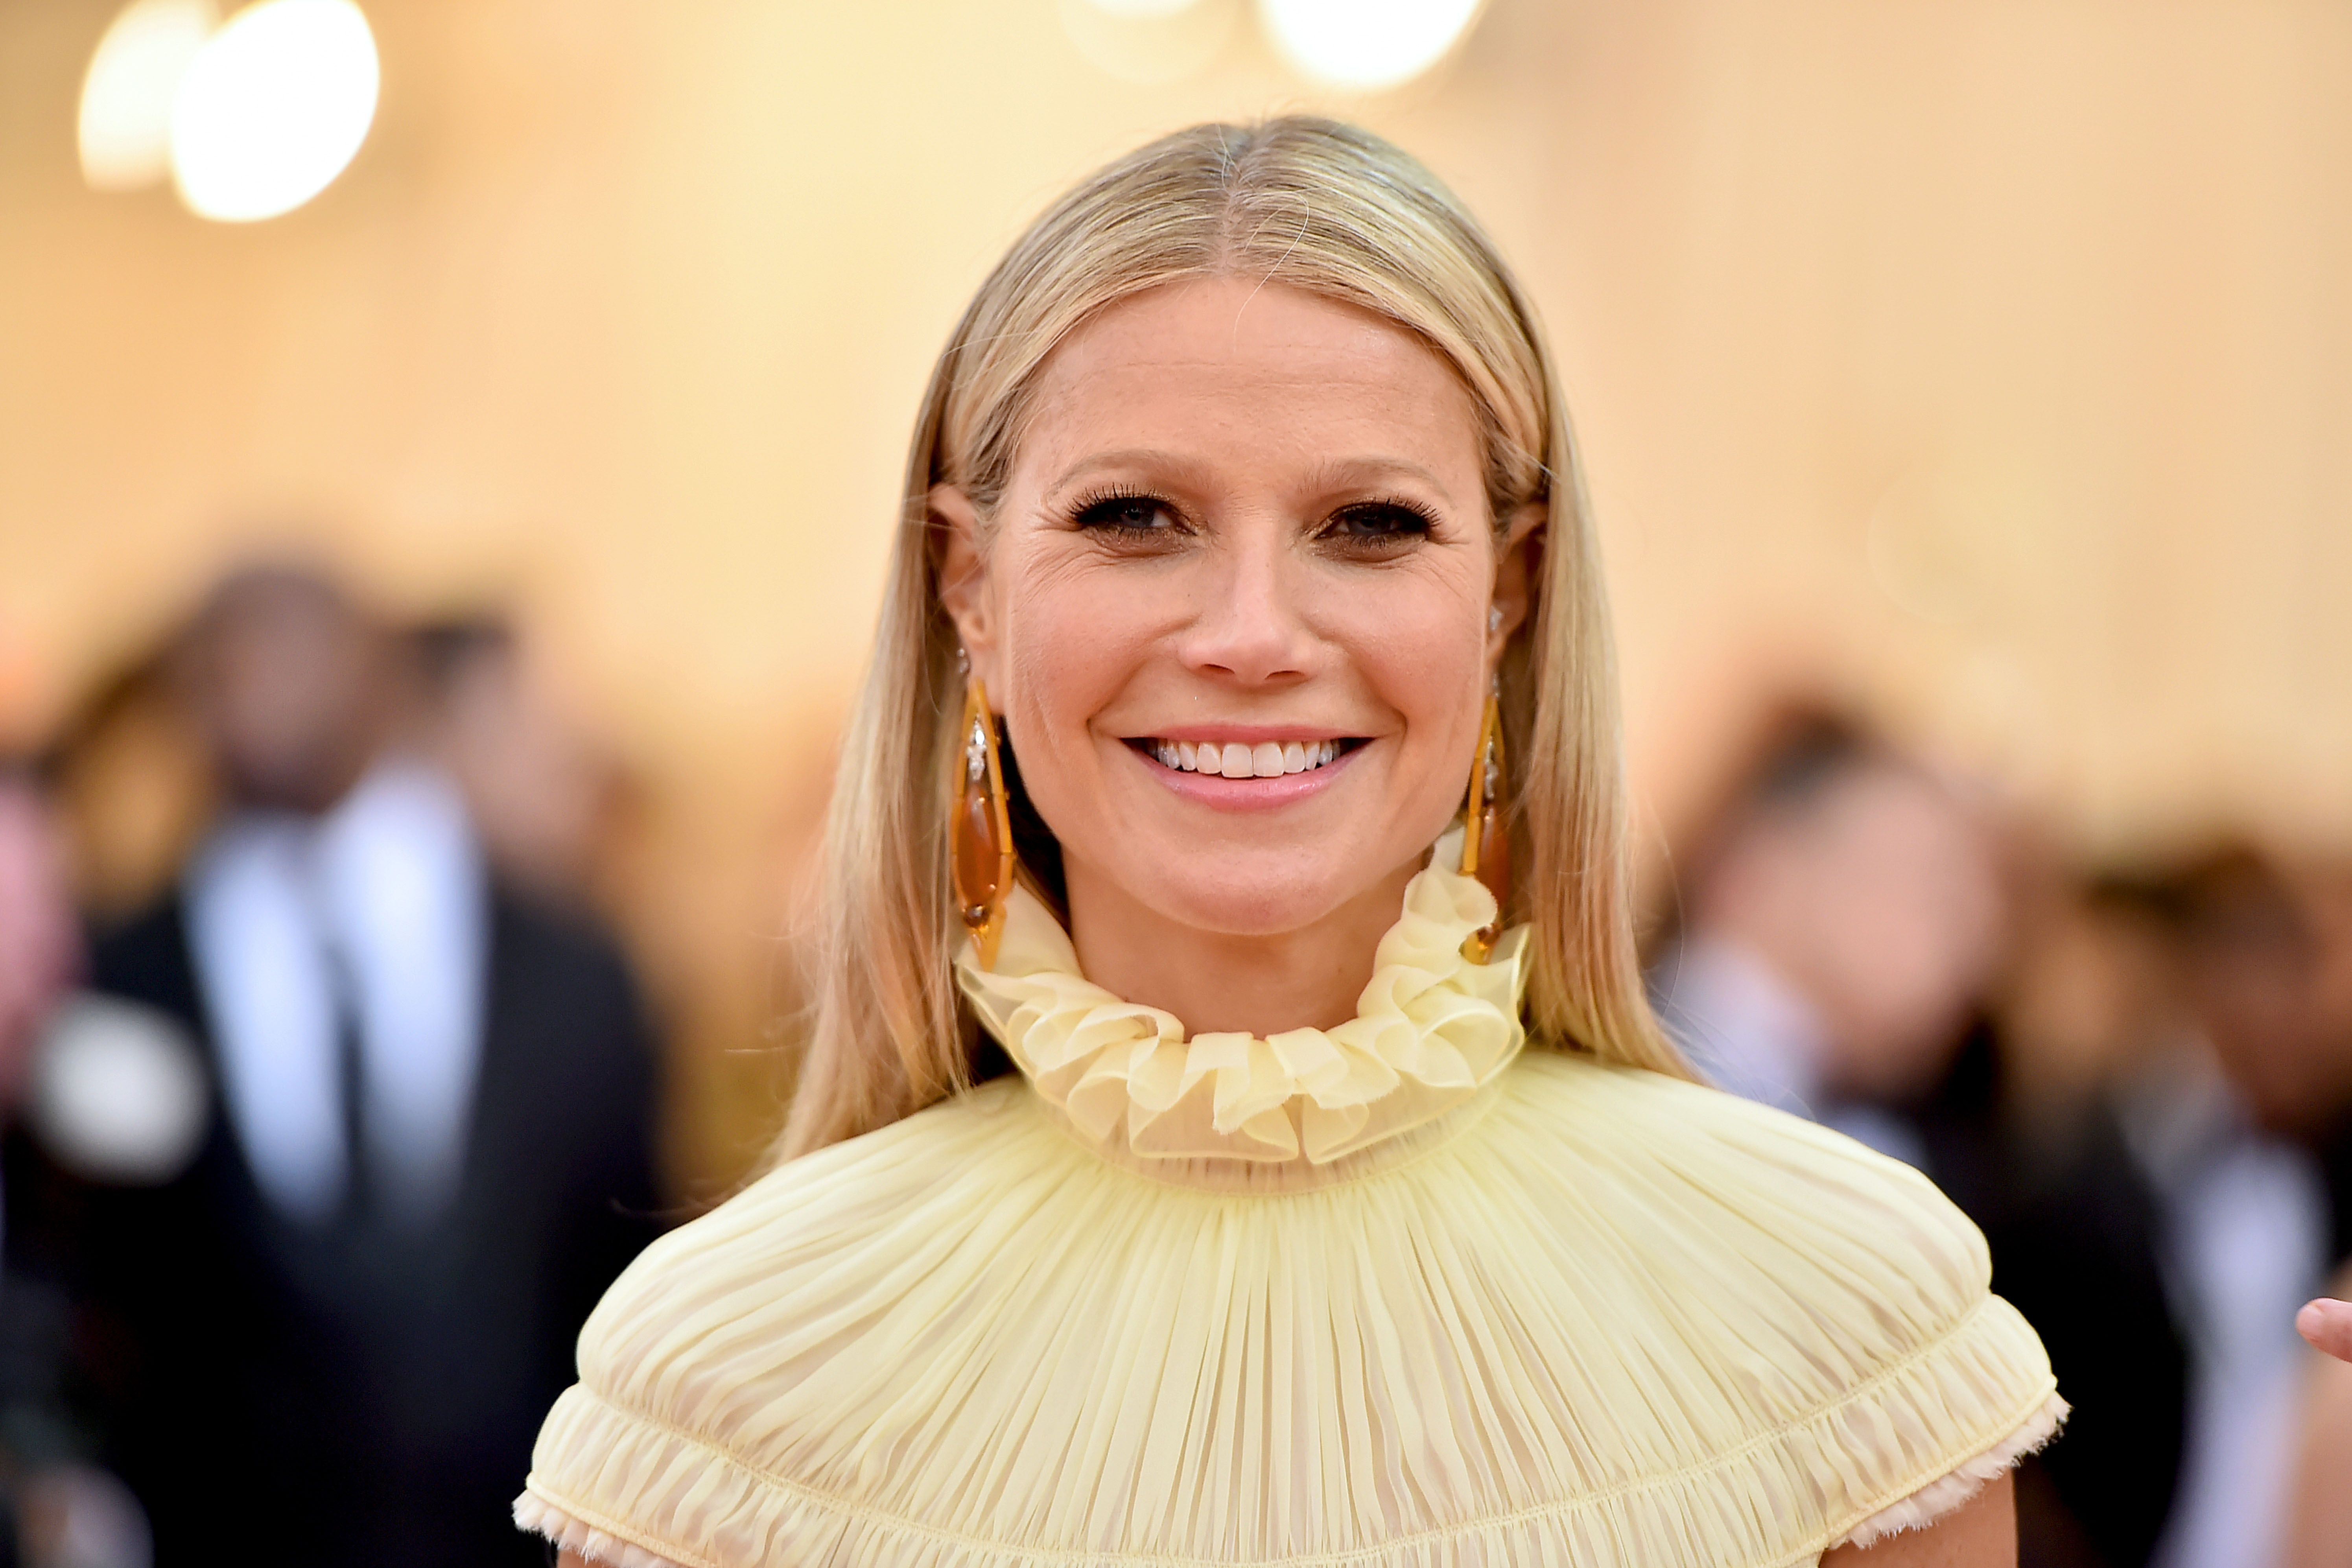 Gwyneth Paltrow Says This Workout Has Kept Her Fit for 15 Years